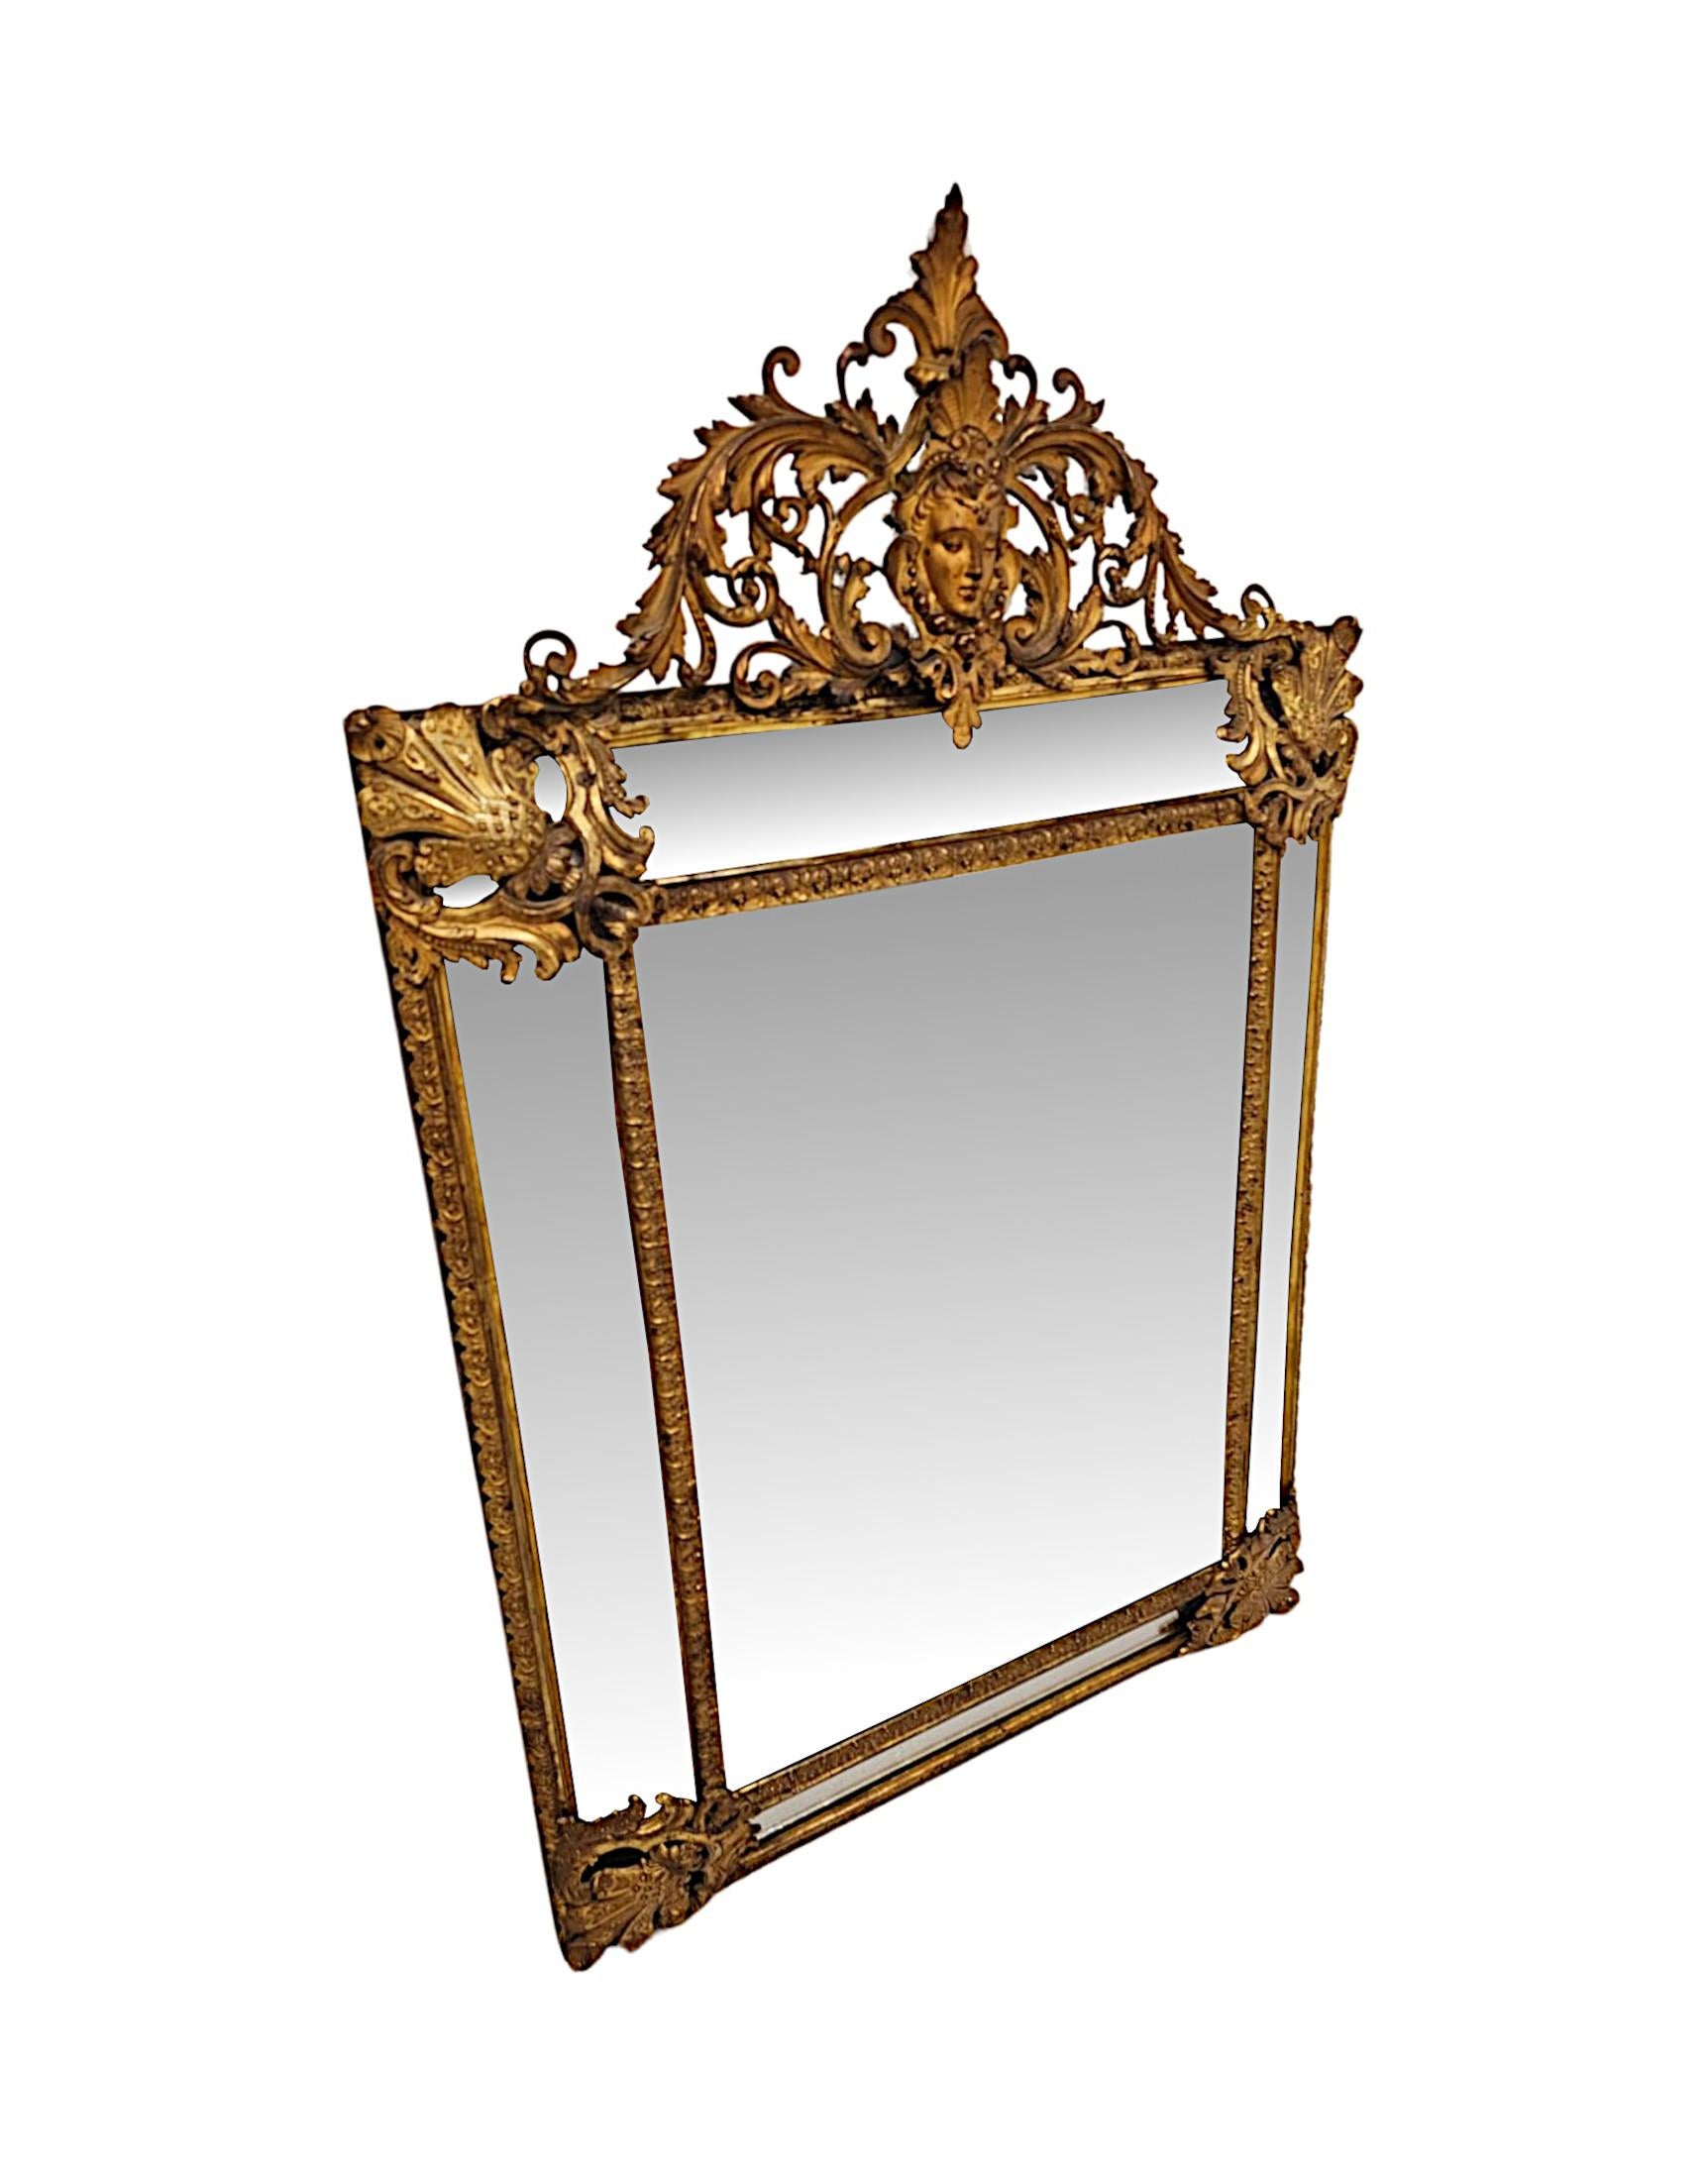 English A Rare and Unusual 19th Century Cast Brass Margin Mirror For Sale